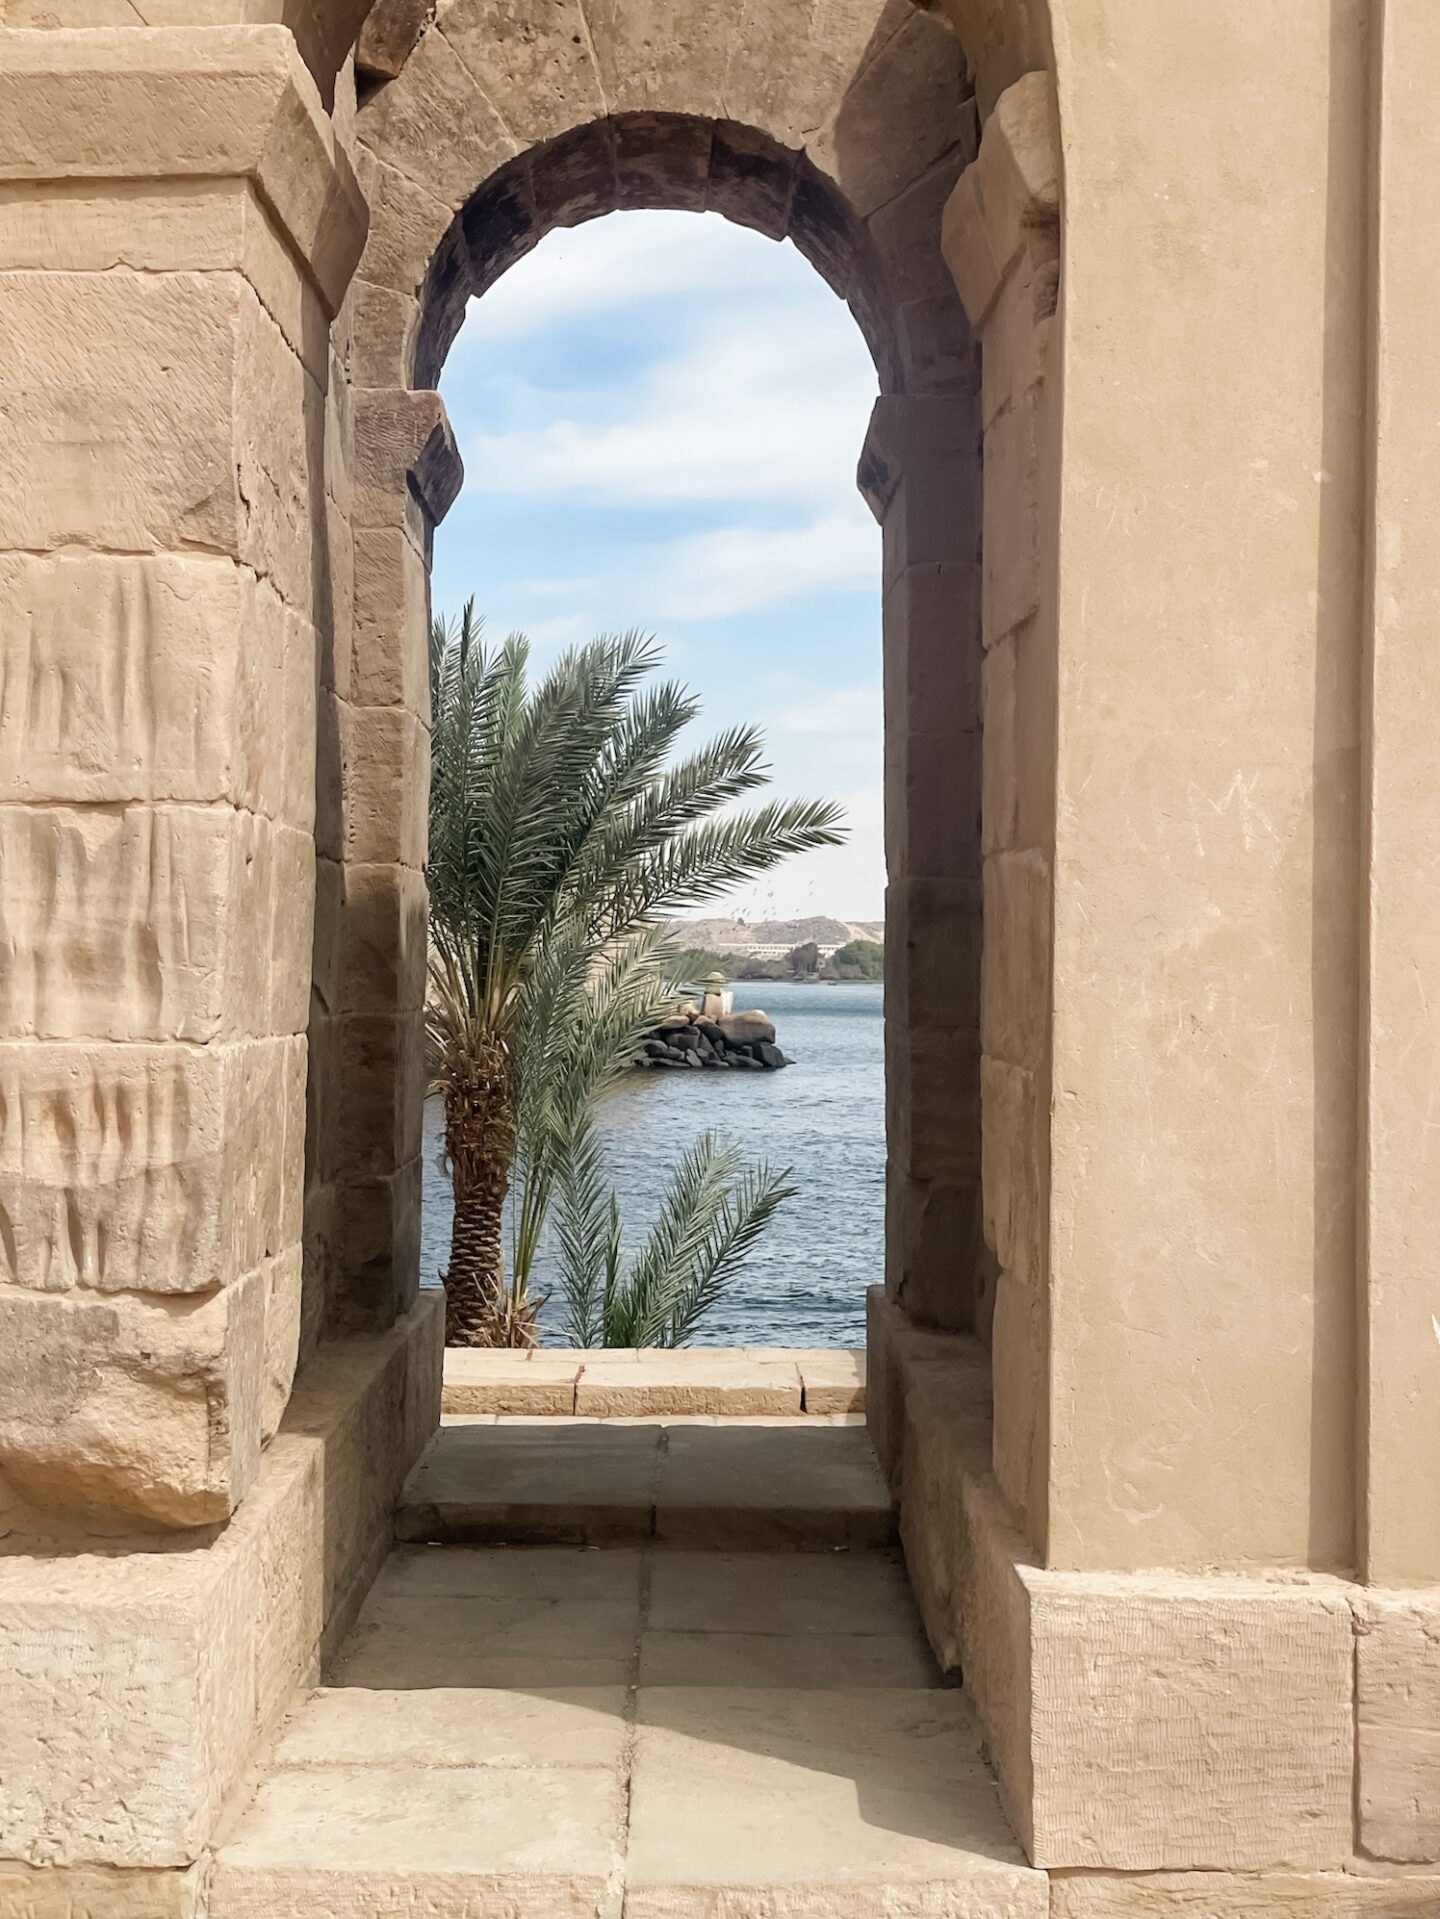 15 Photos To Inspire You To Visit Egypt